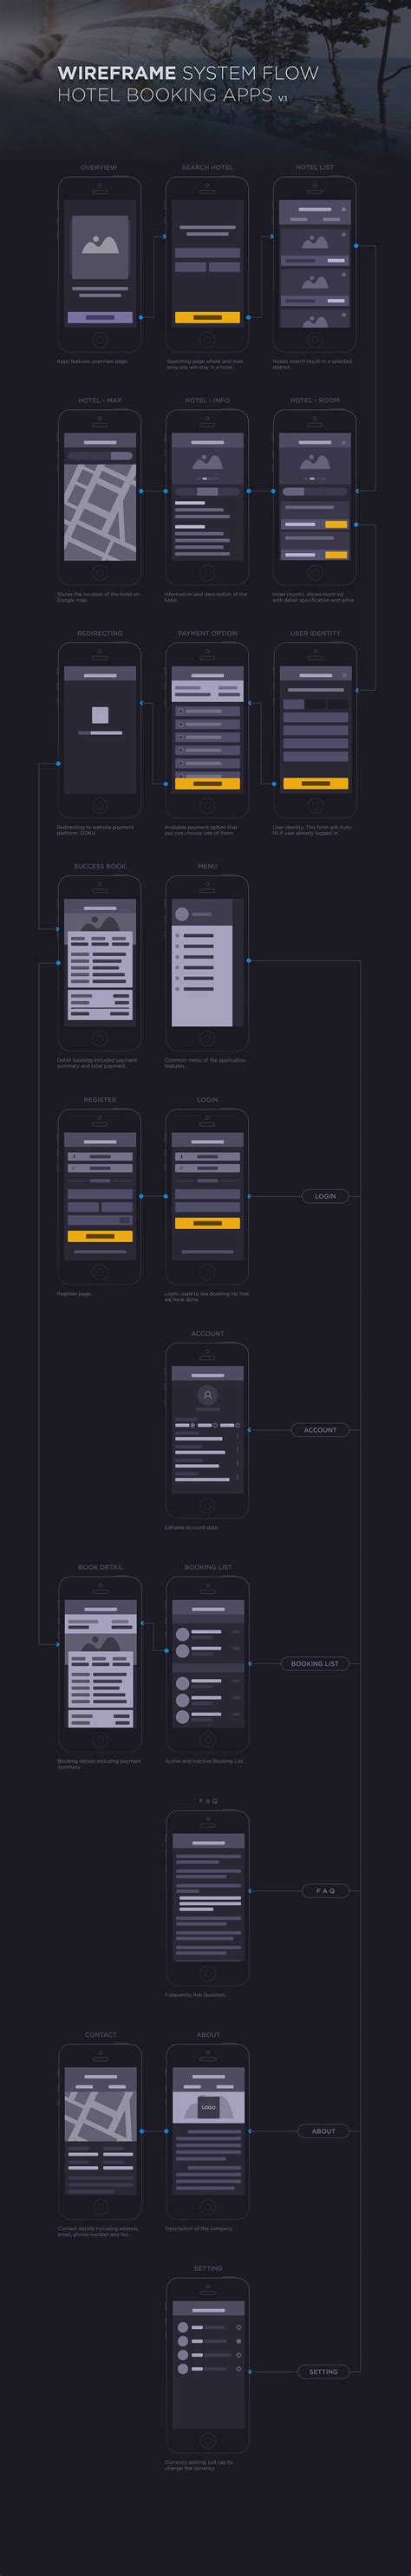 Your resource to discover and connect with designers worldwide. Hotel Booking Apps Wireframe Design on Behance